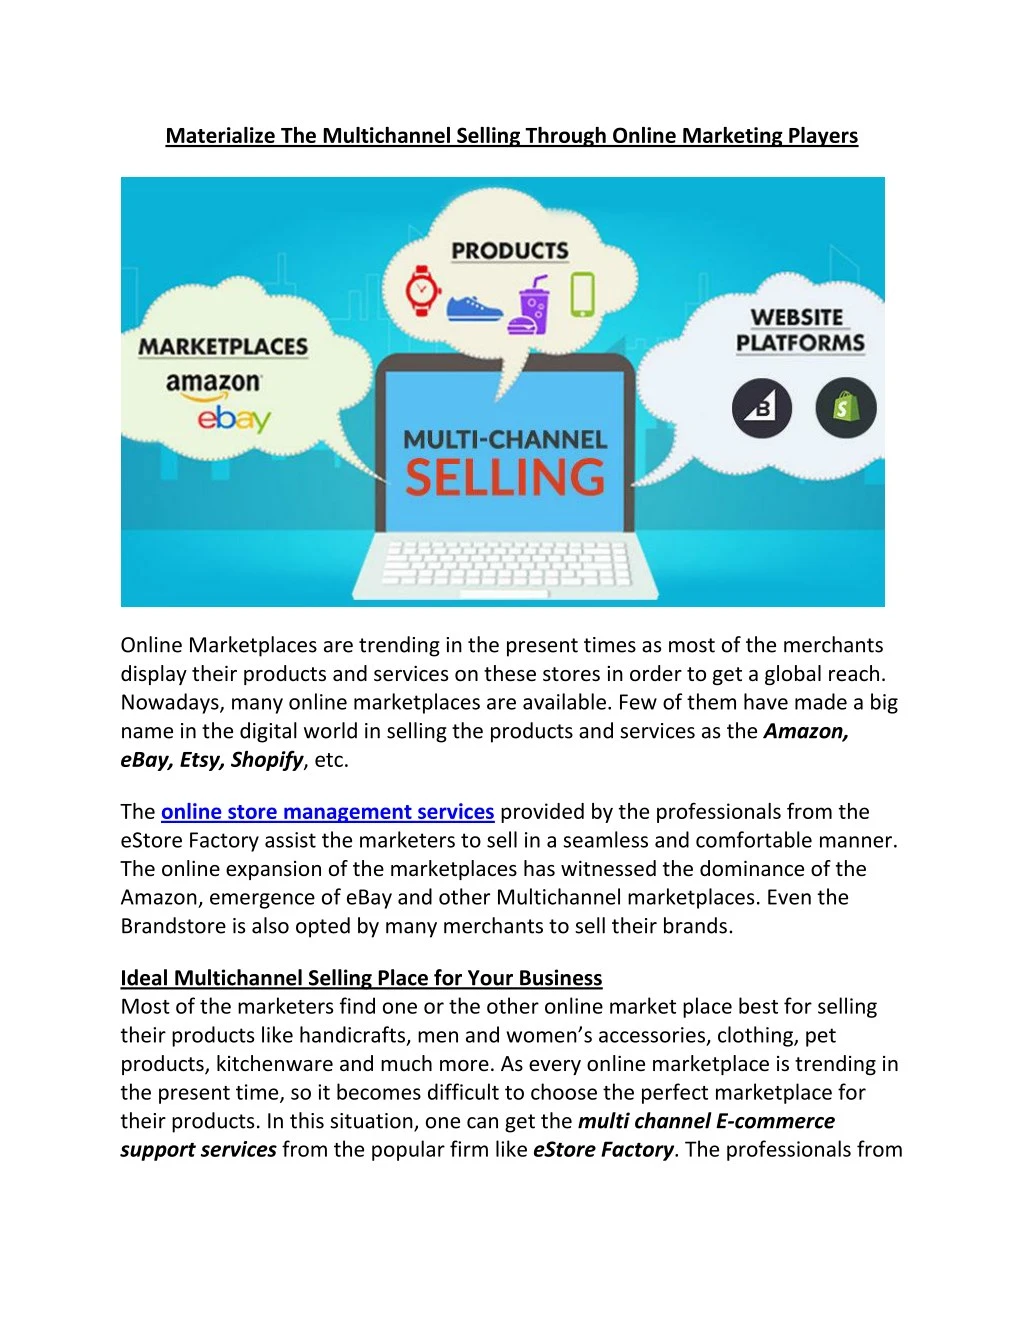 materialize the multichannel selling through